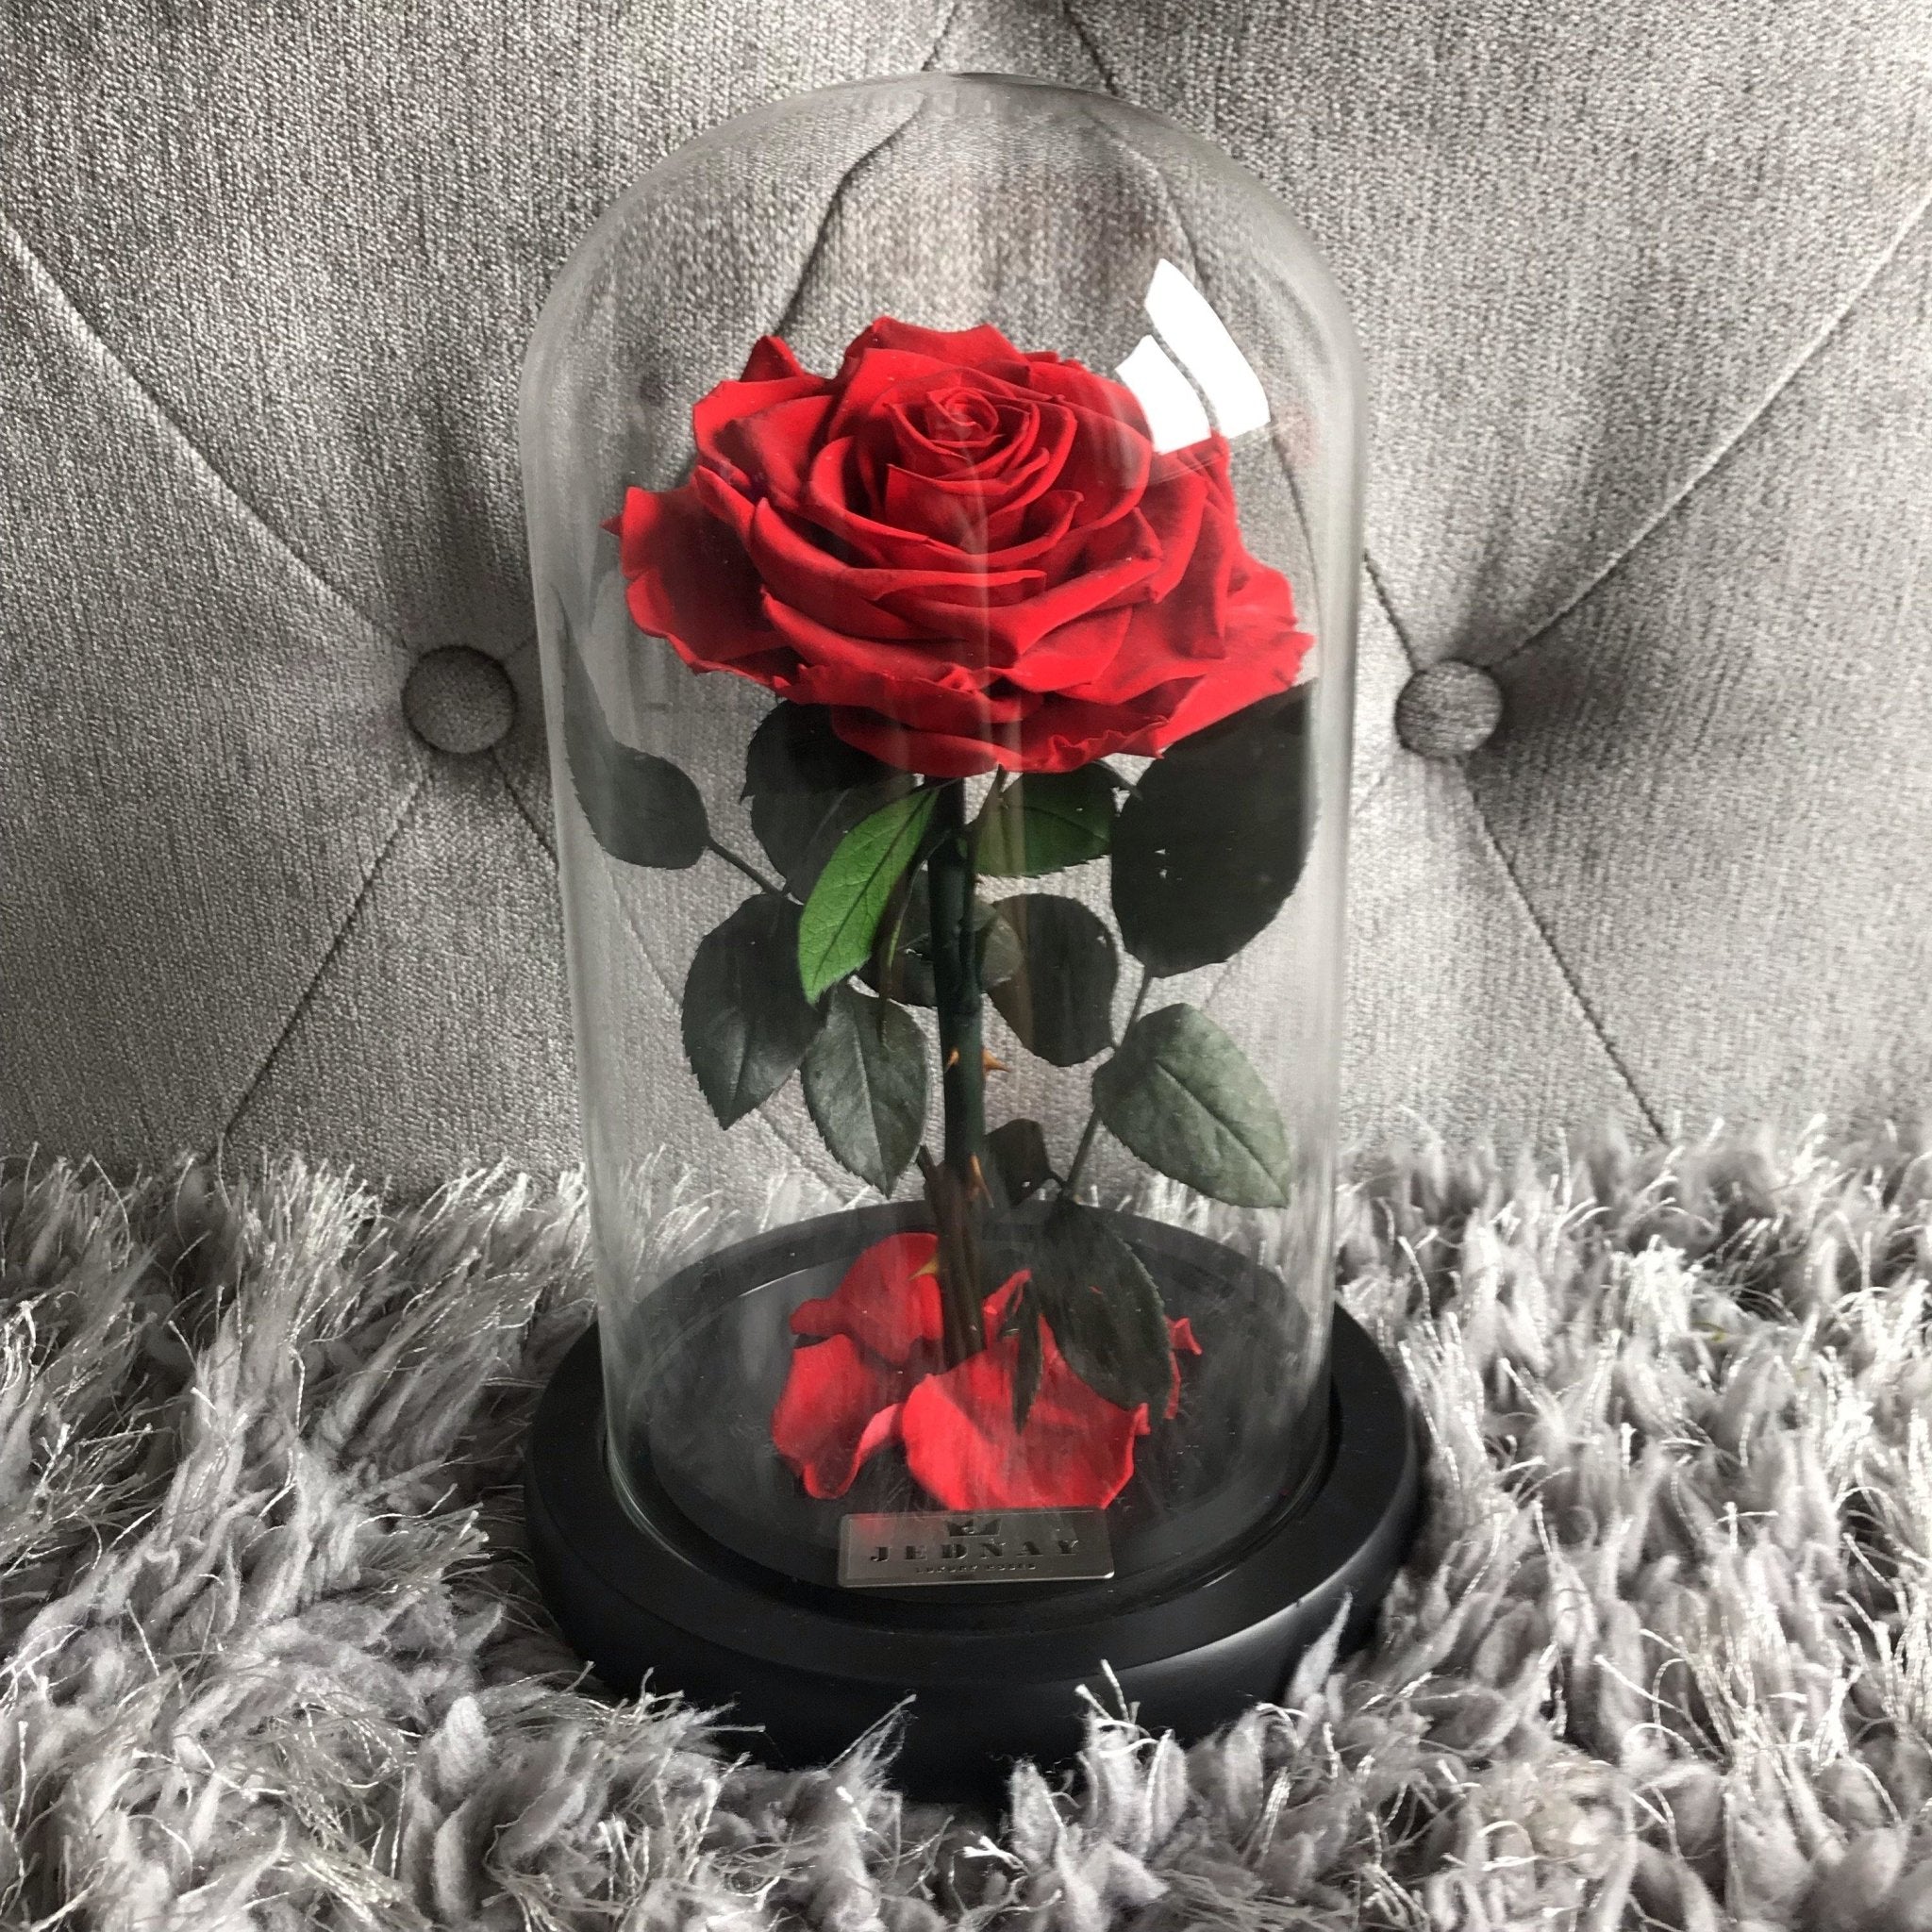 The Belle by Jednay® Classic Red Infinity Rose - Jednay Roses